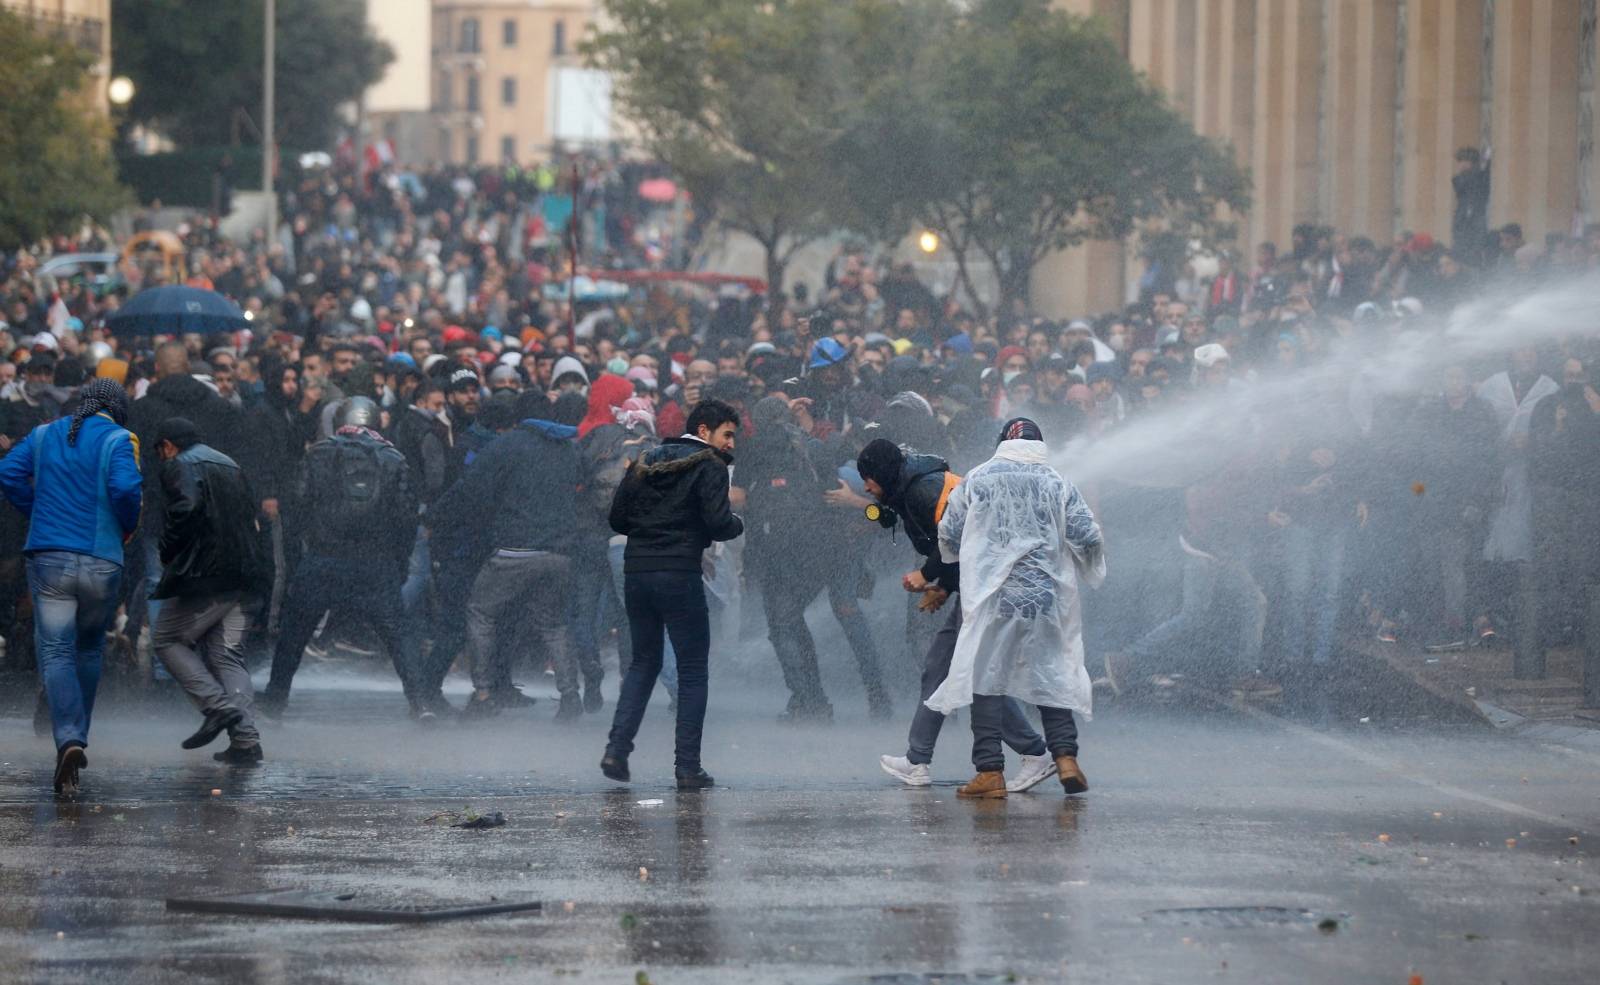 Demonstrators are hit by water canon during a protest against a ruling elite accused of steering Lebanon towards economic crisis in Beirut